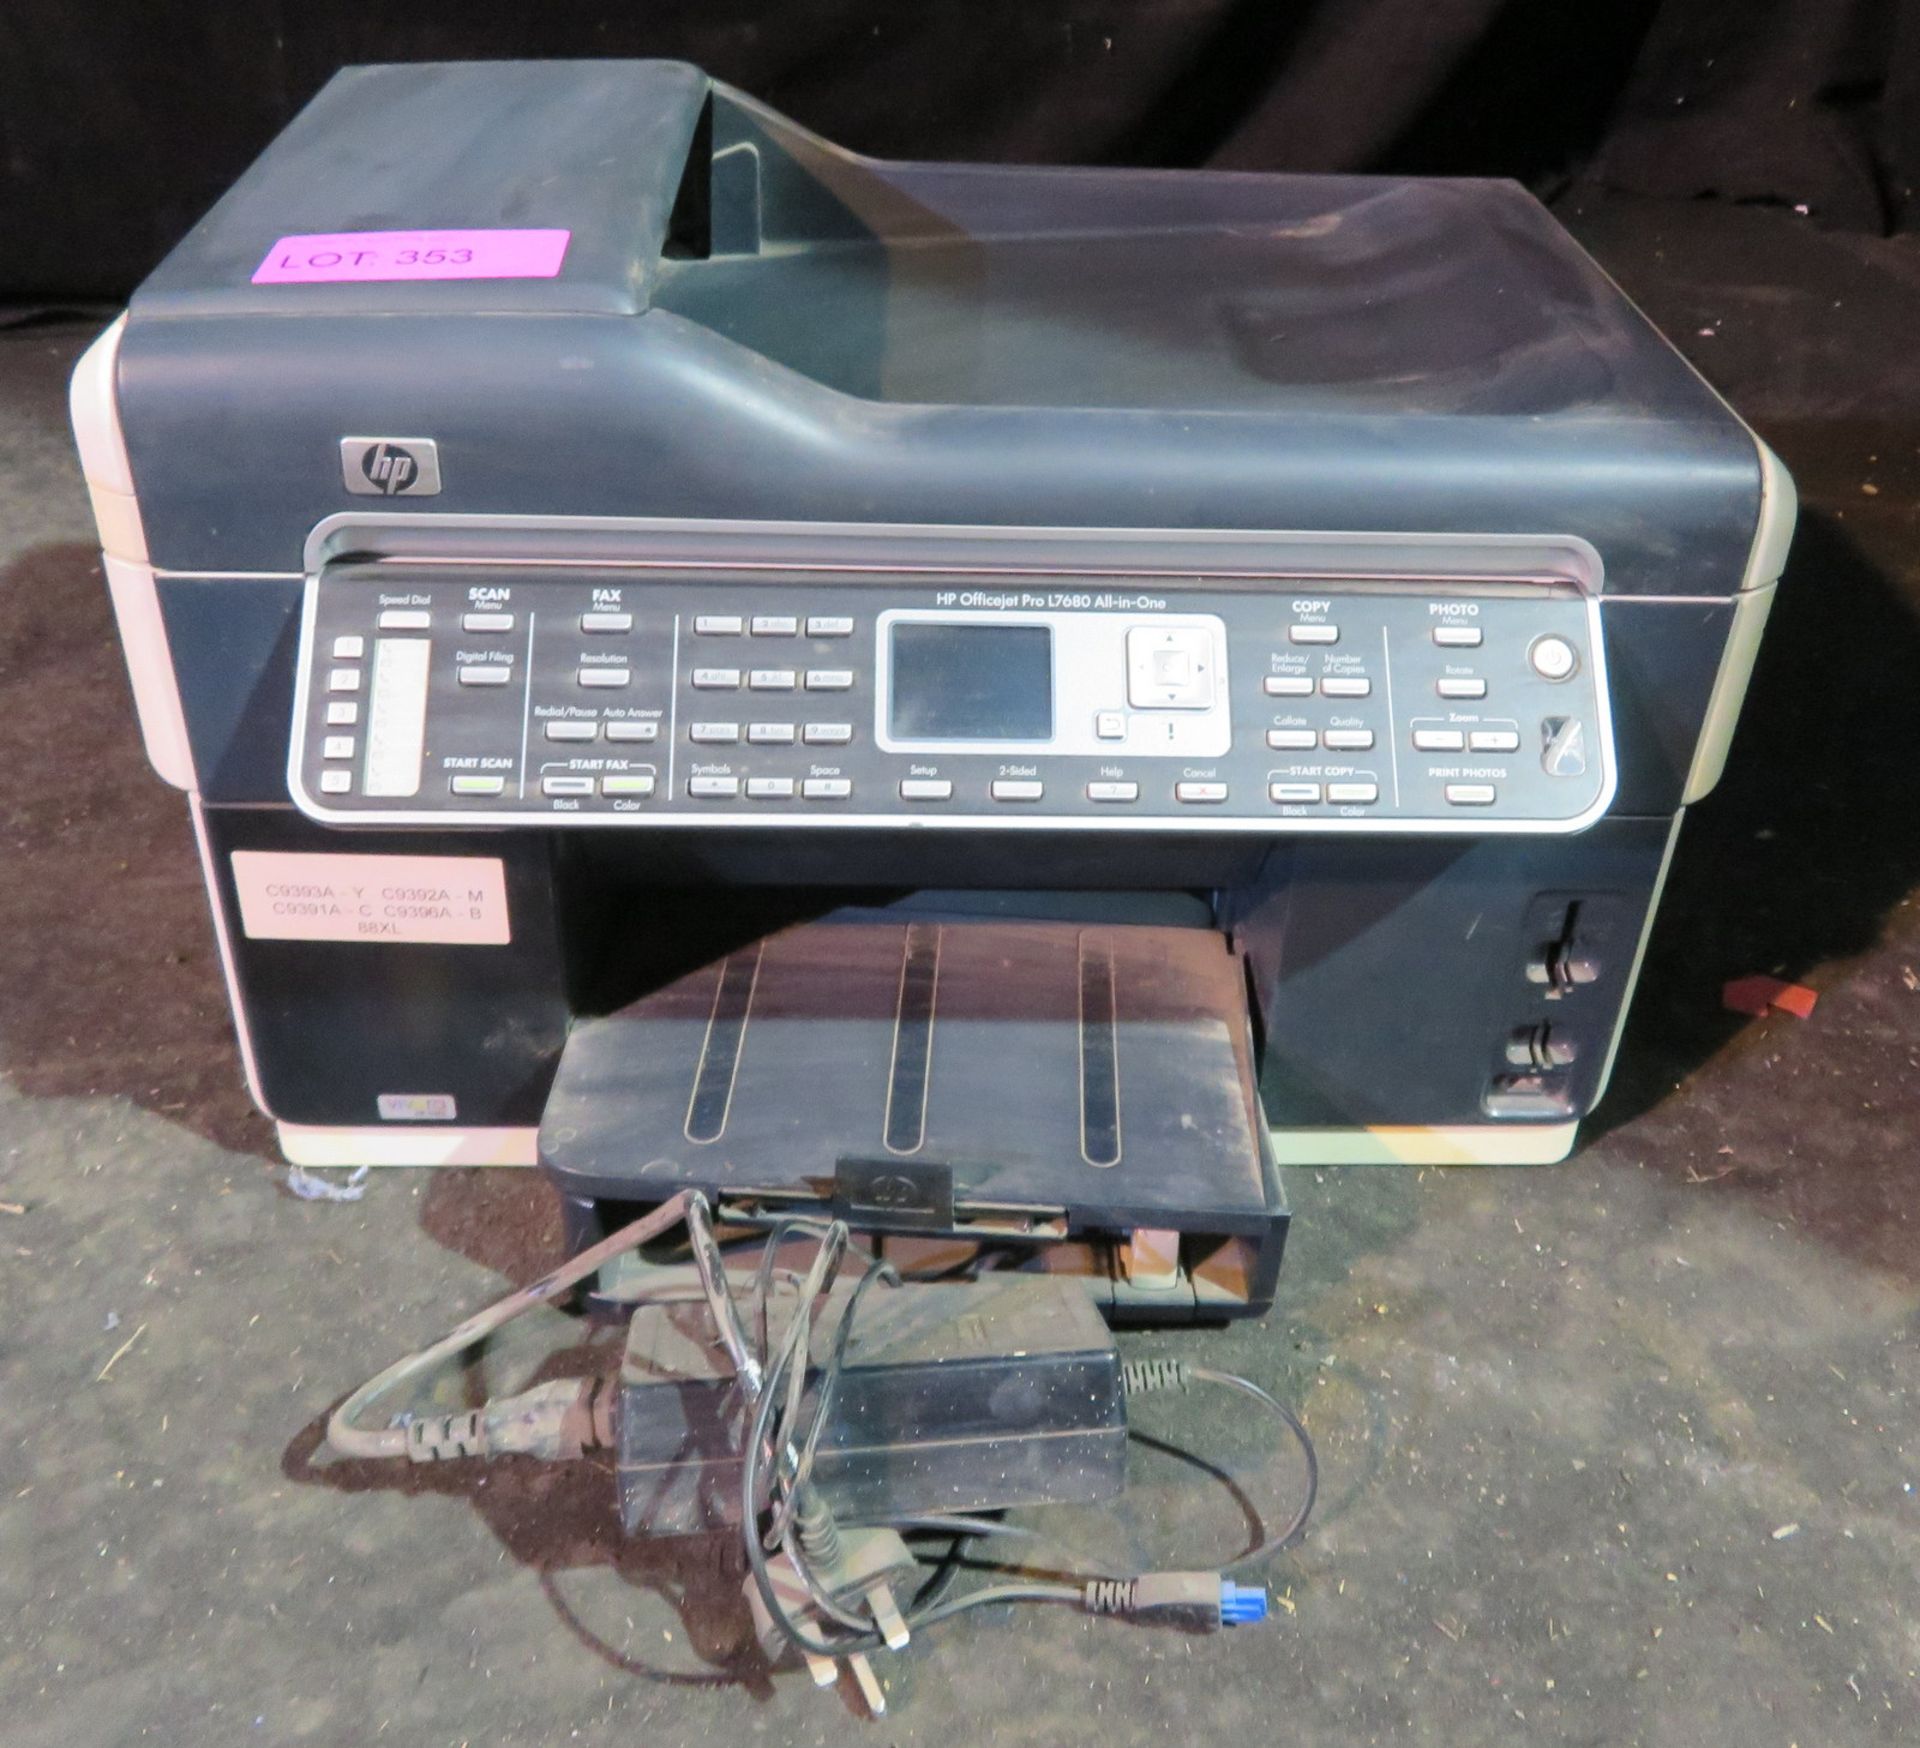 HP Office Jet Pro L7680 all in one printer. Includes various inks